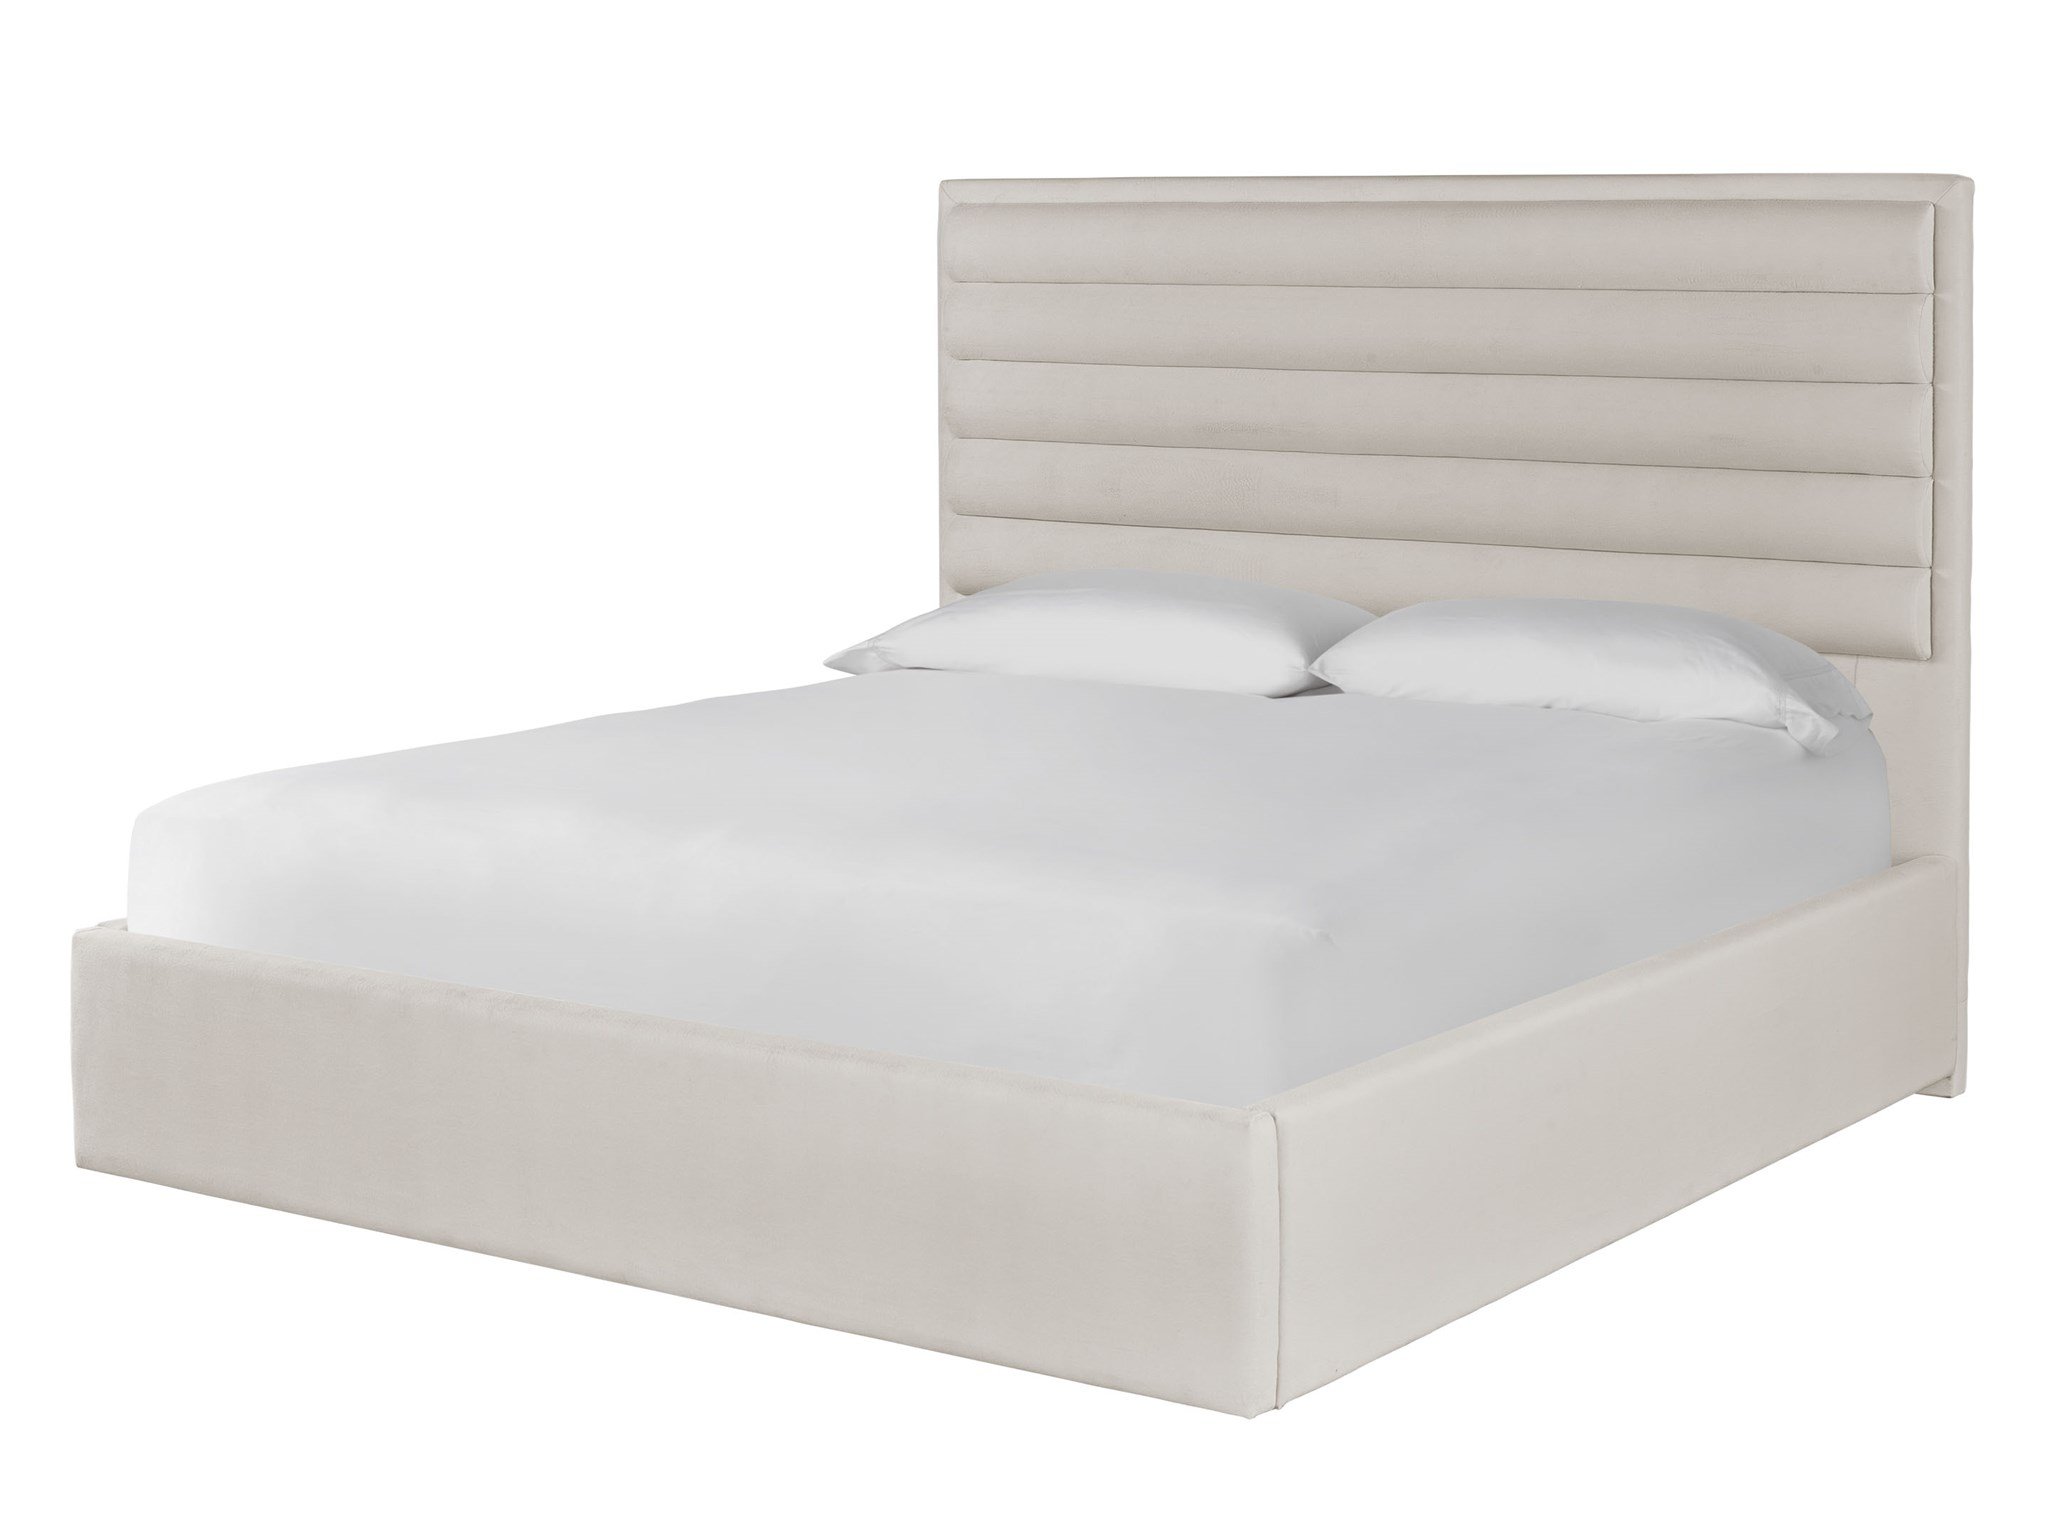 Tranquility Upholstered Bed Queen